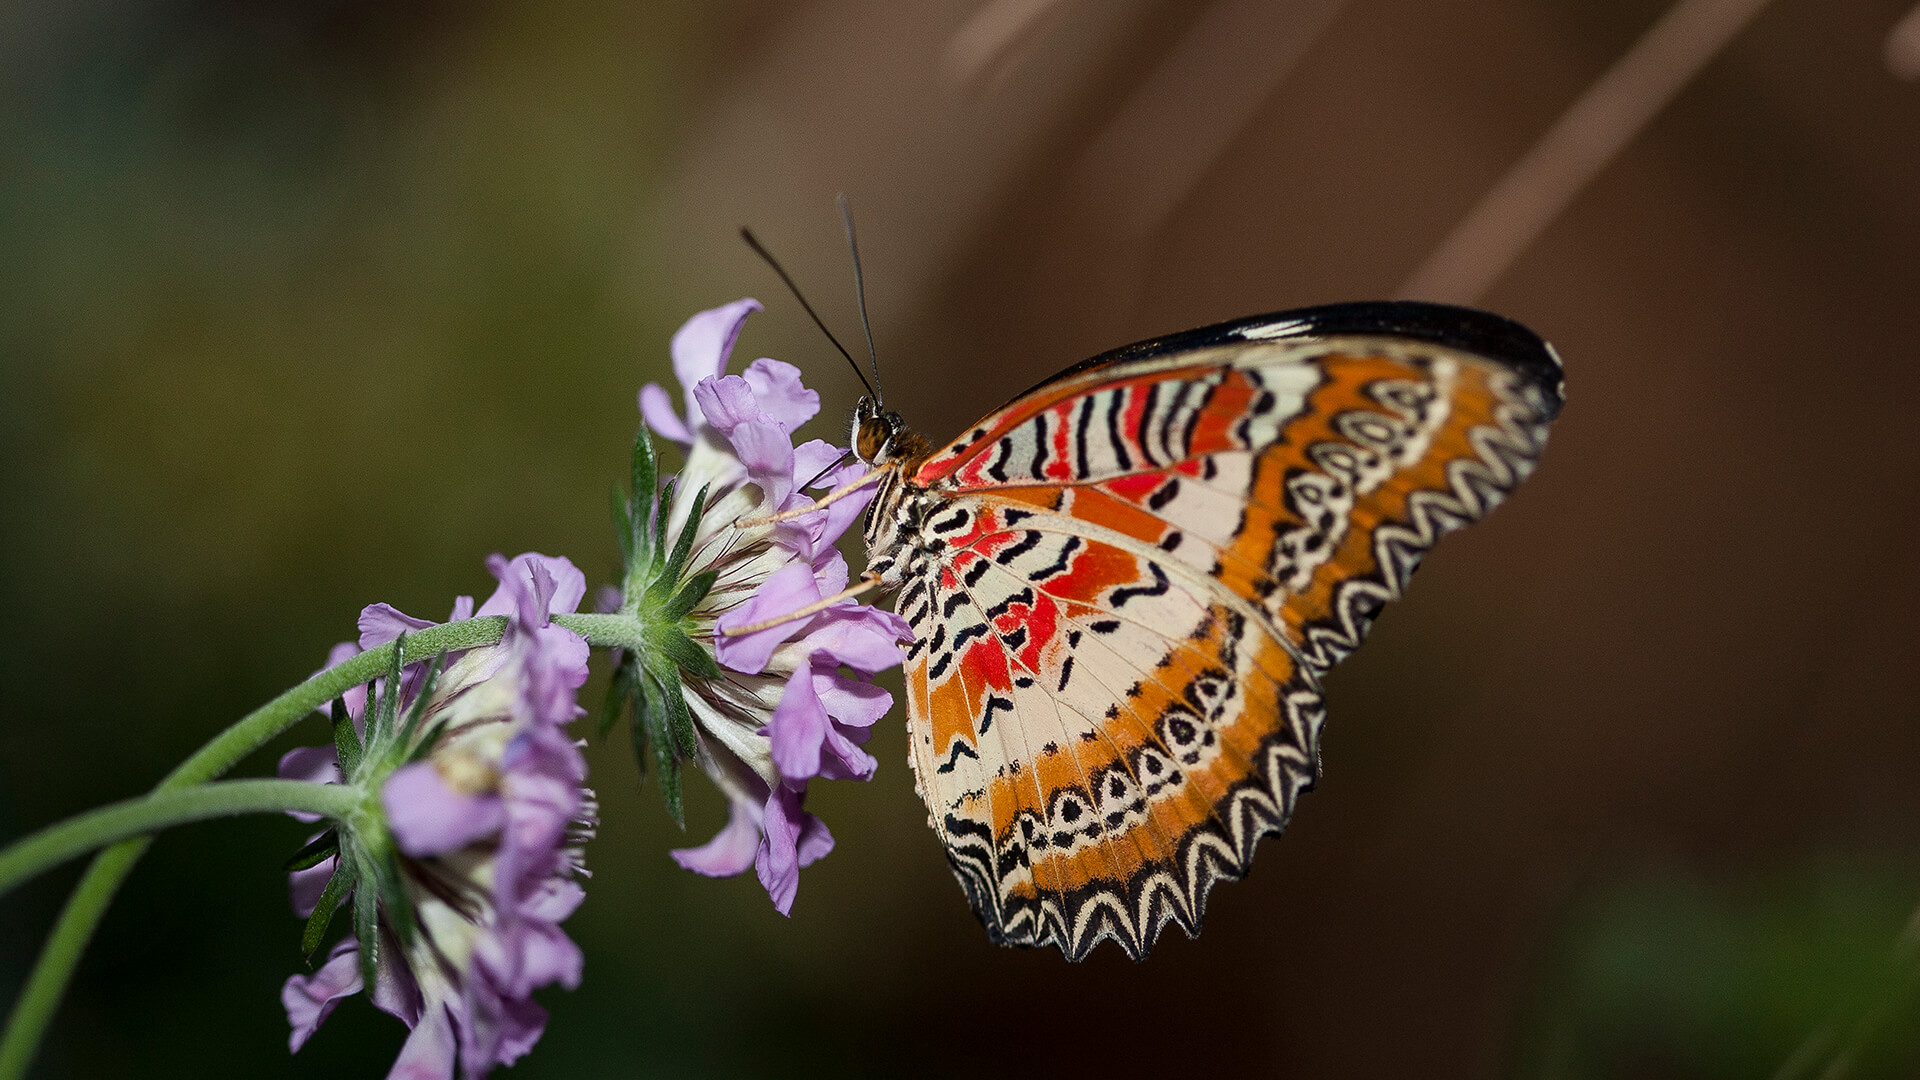 Orange colored butterfly sipping nectar from a purple flower